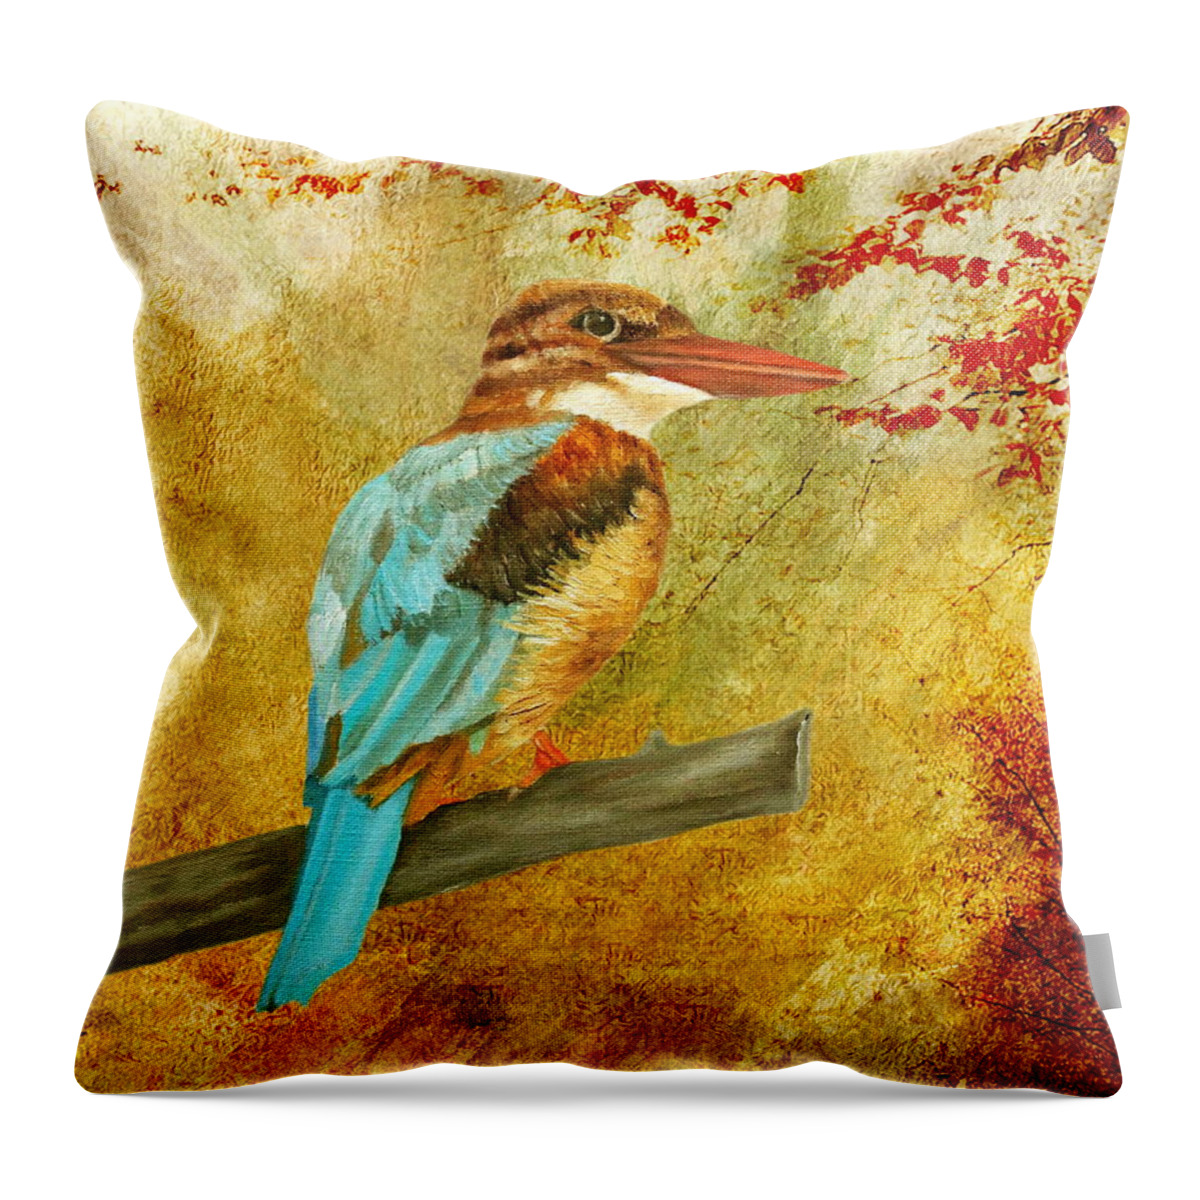 Kingfisher Throw Pillow featuring the painting Autumnal Kingfisher by Angeles M Pomata